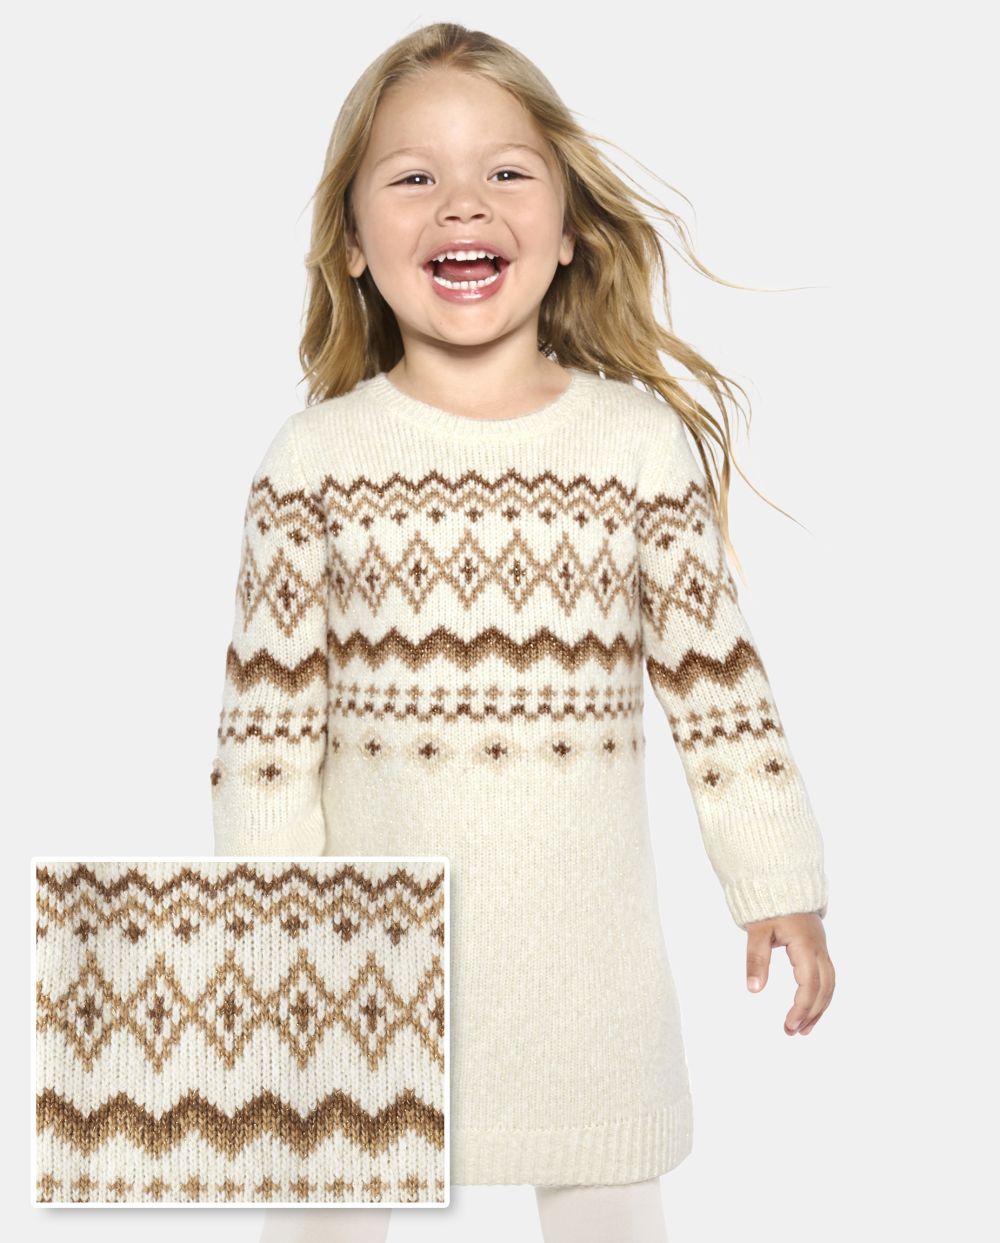 Tall Toddler Baby Crew Neck Sweater Above the Knee Long Sleeves Dress